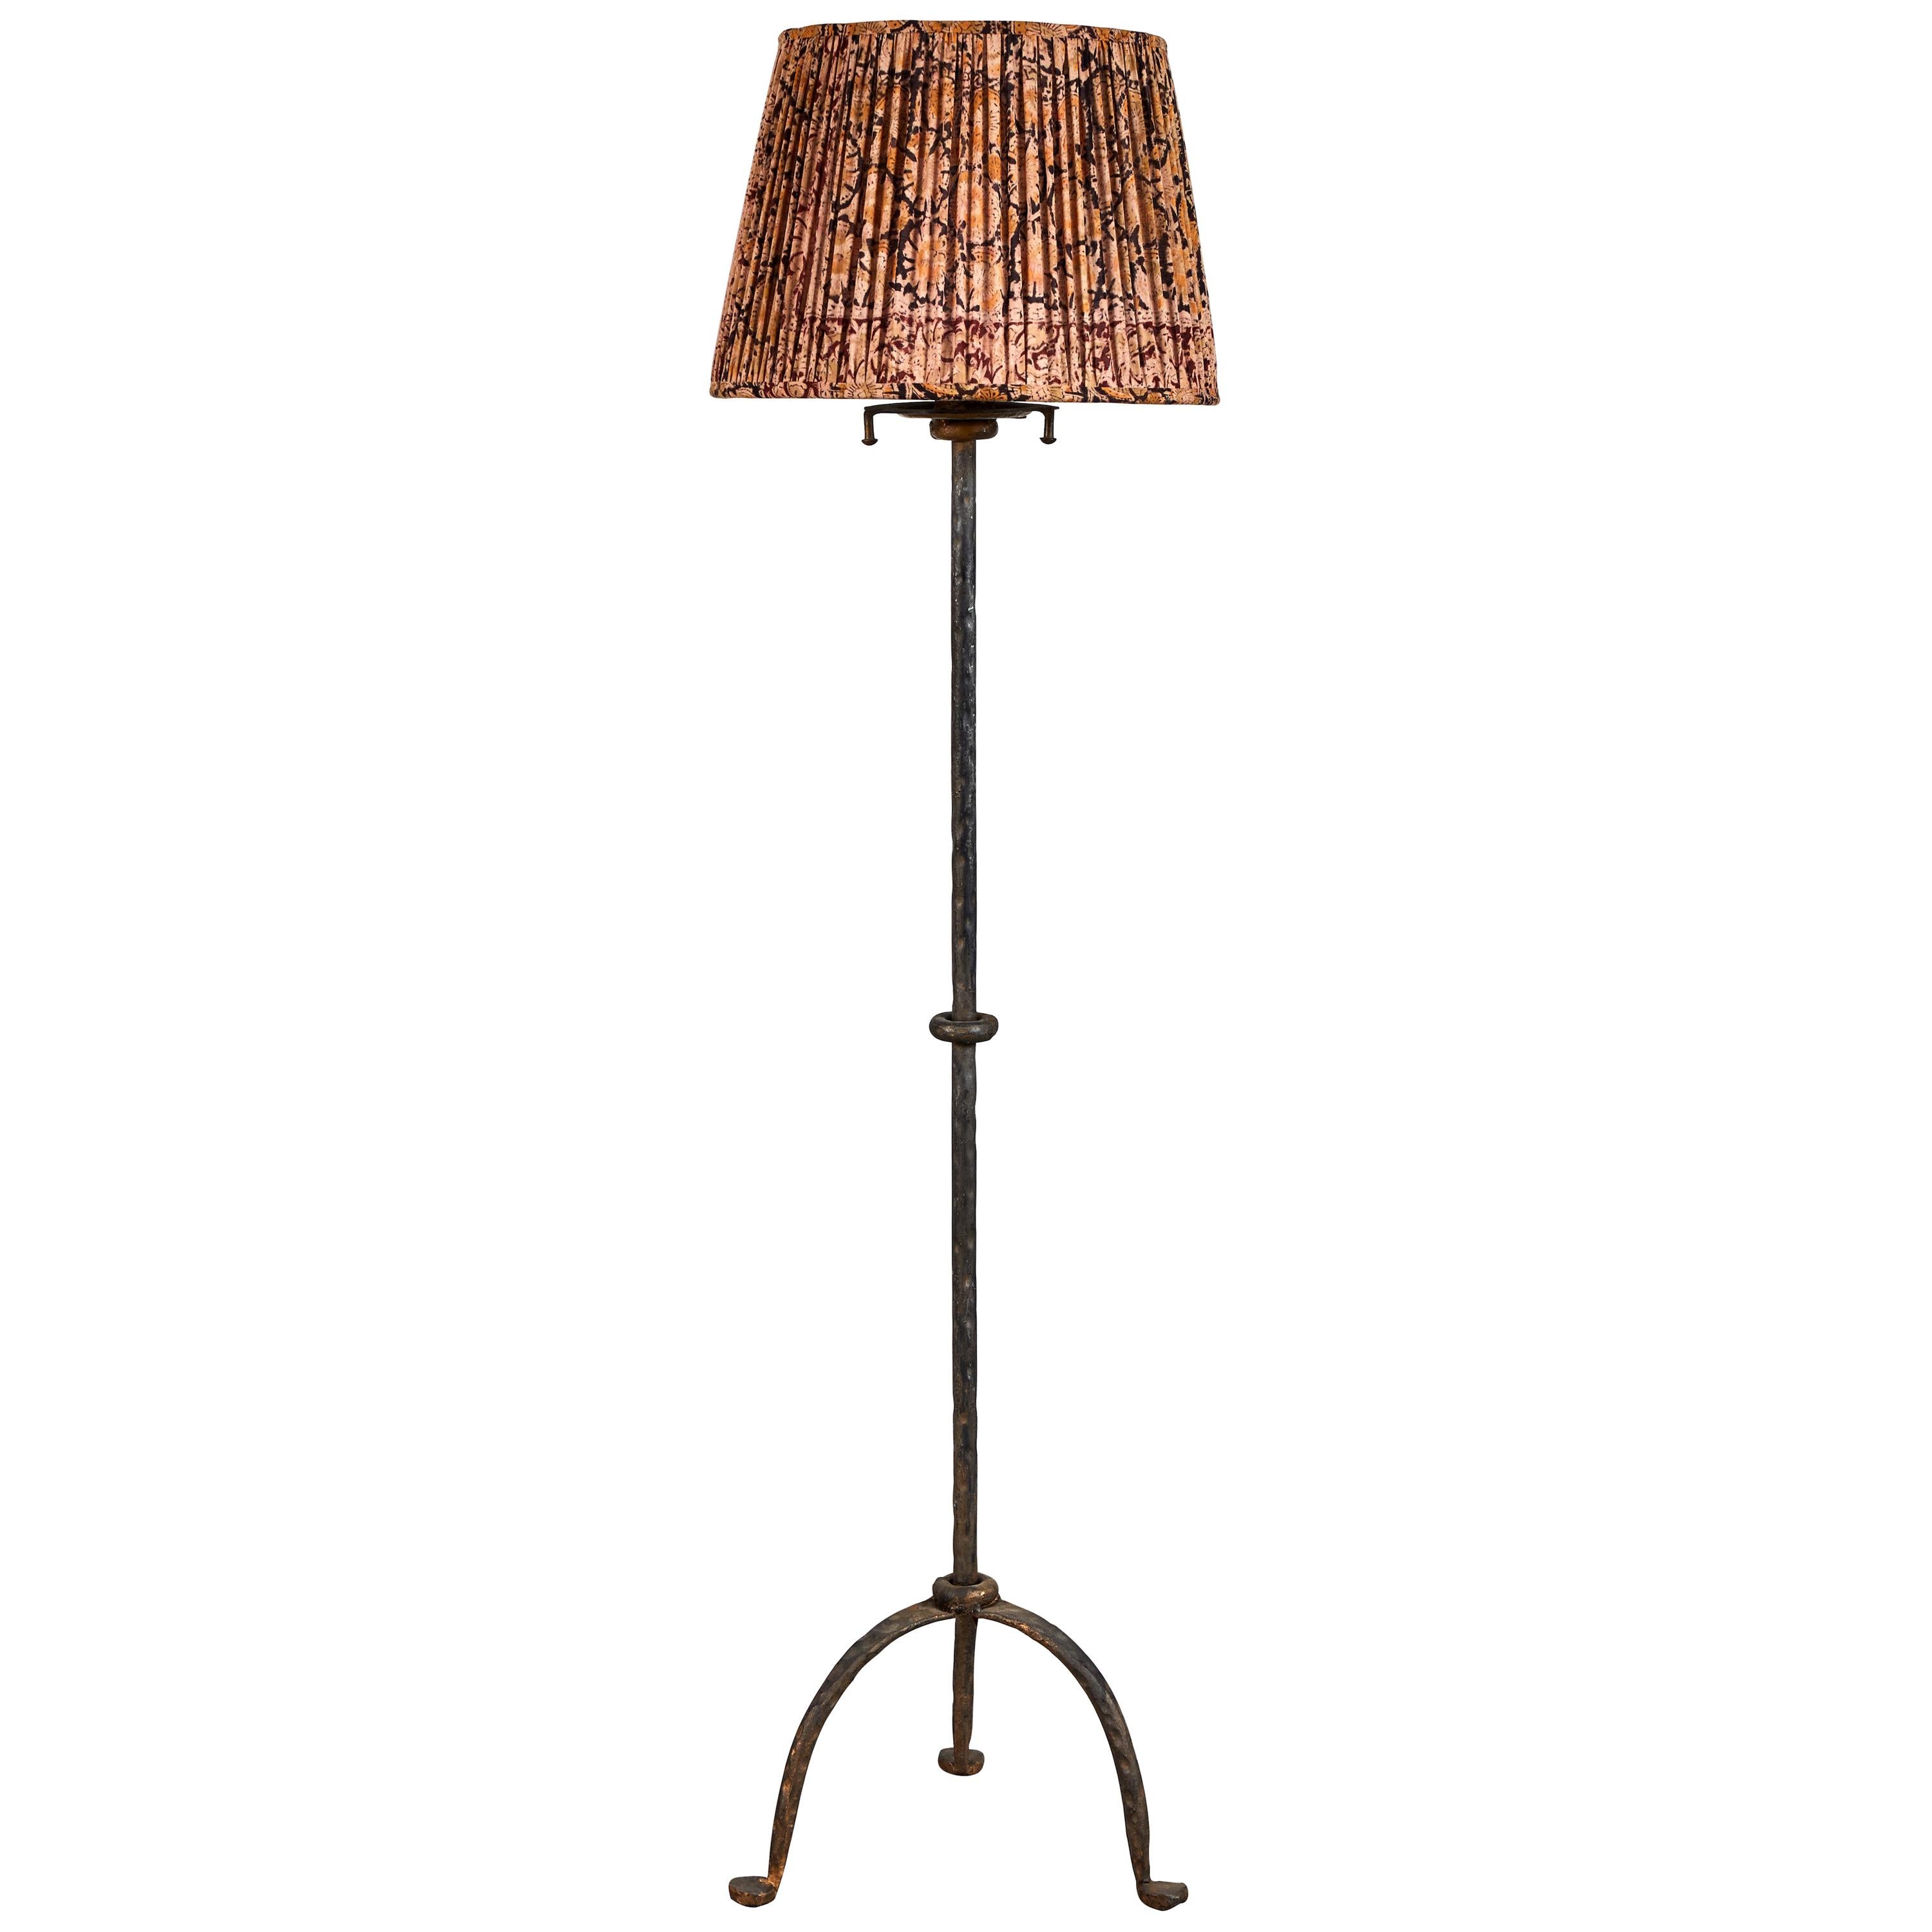 French Iron Floor Lamp with Shirred Lampshade